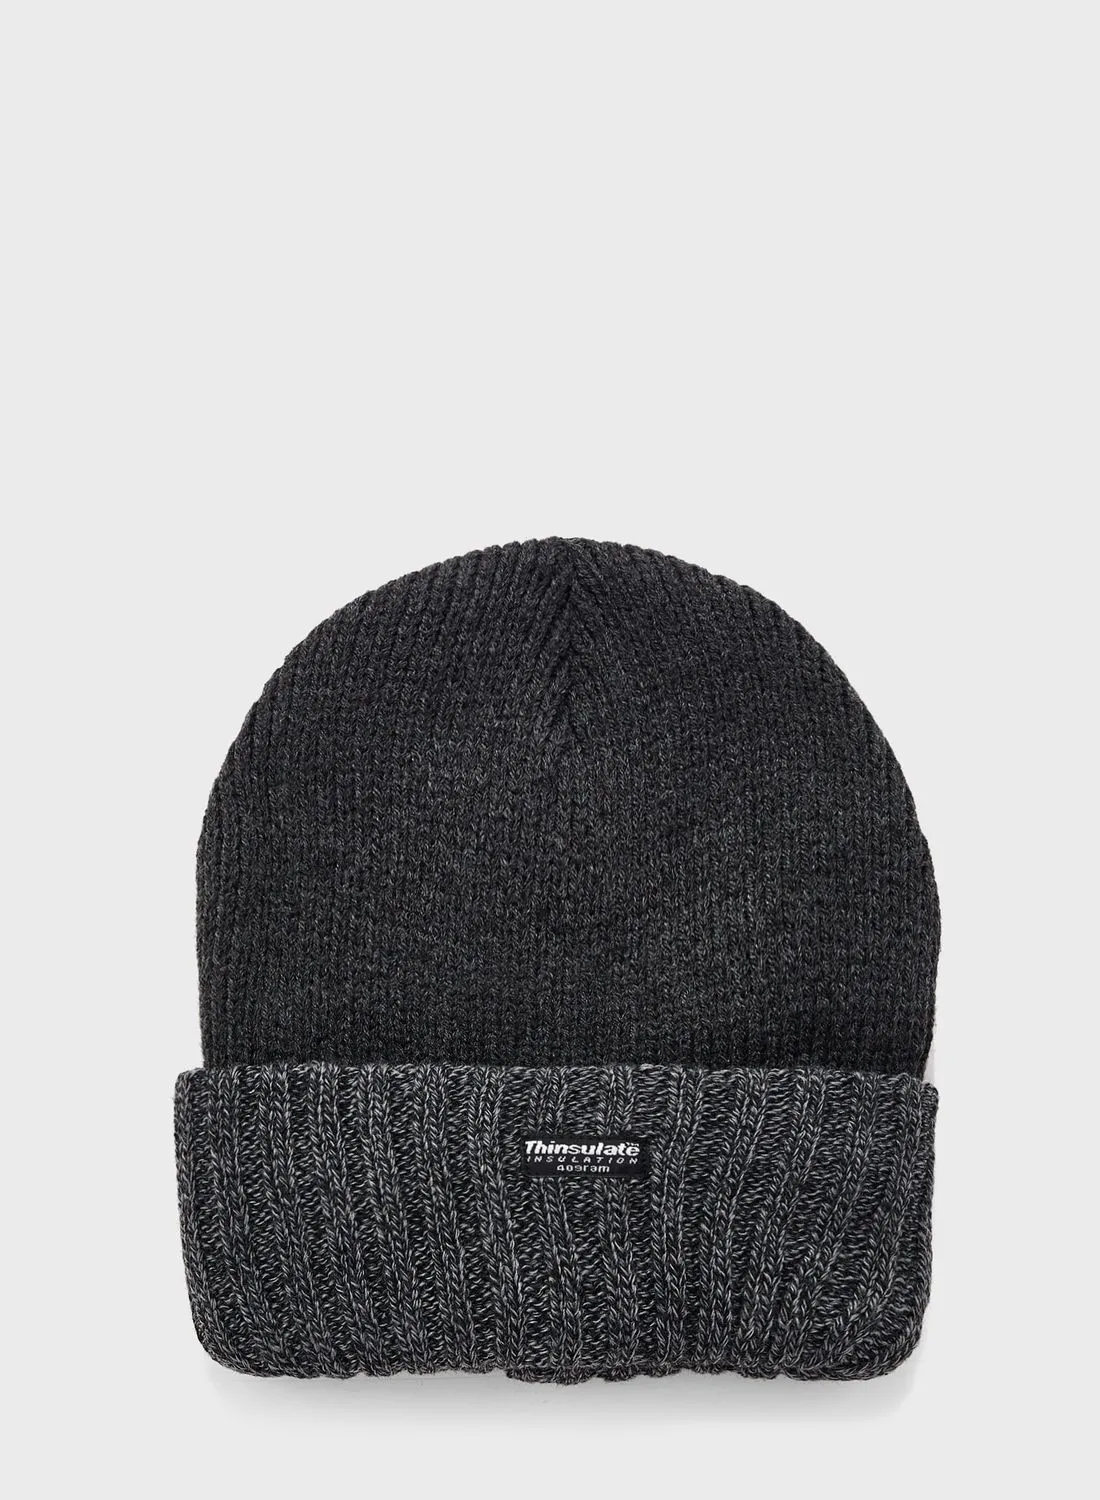 Robert Wood Turn Up Ribbed Thinsulate Lined Winter Beanie